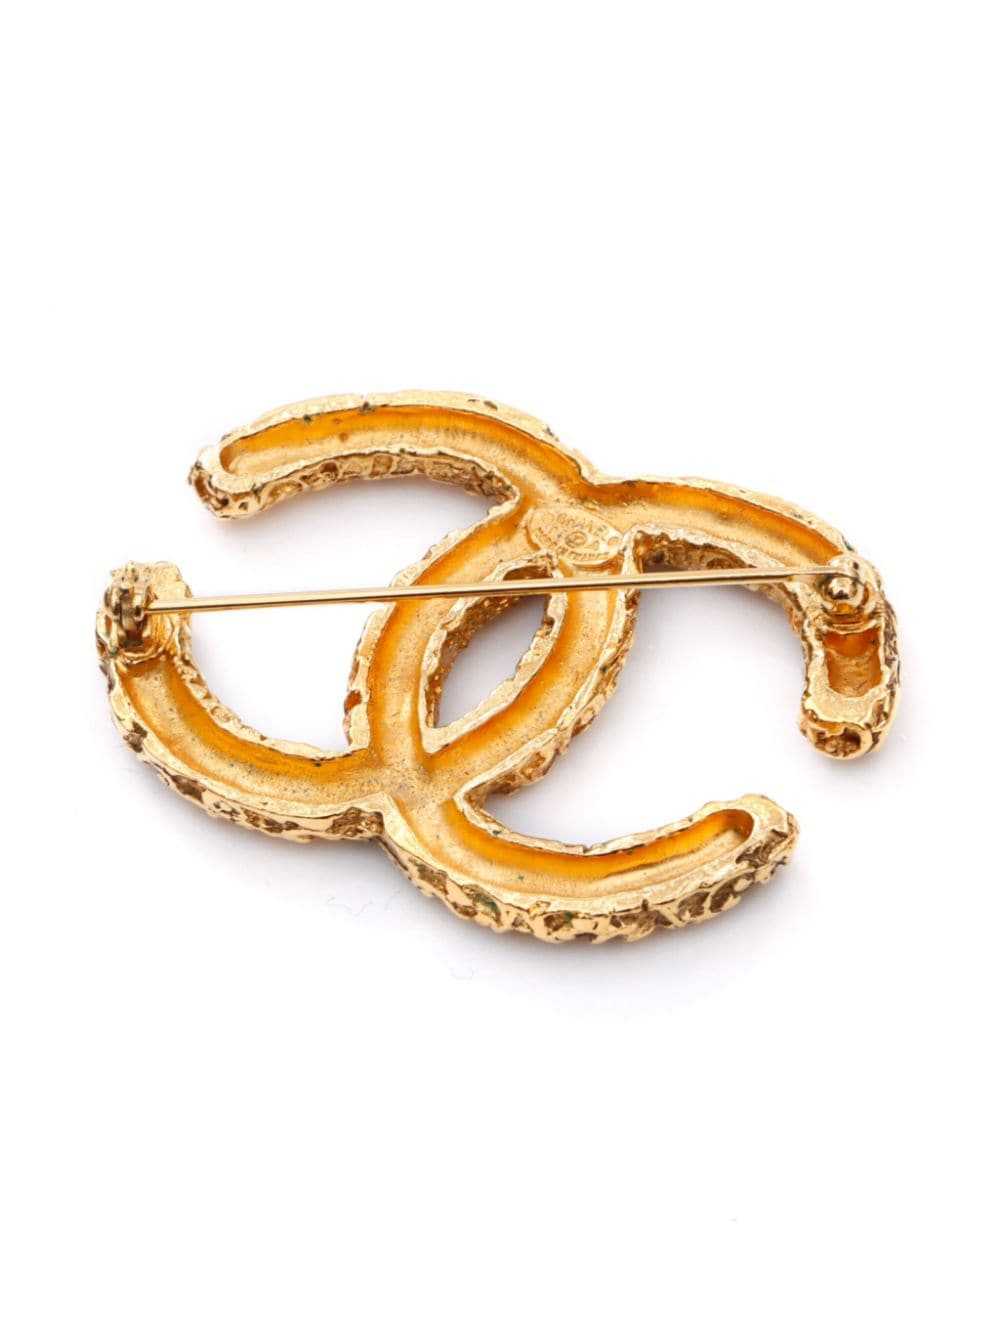 CHANEL Pre-Owned 1993 CC gold plated brooch - image 4